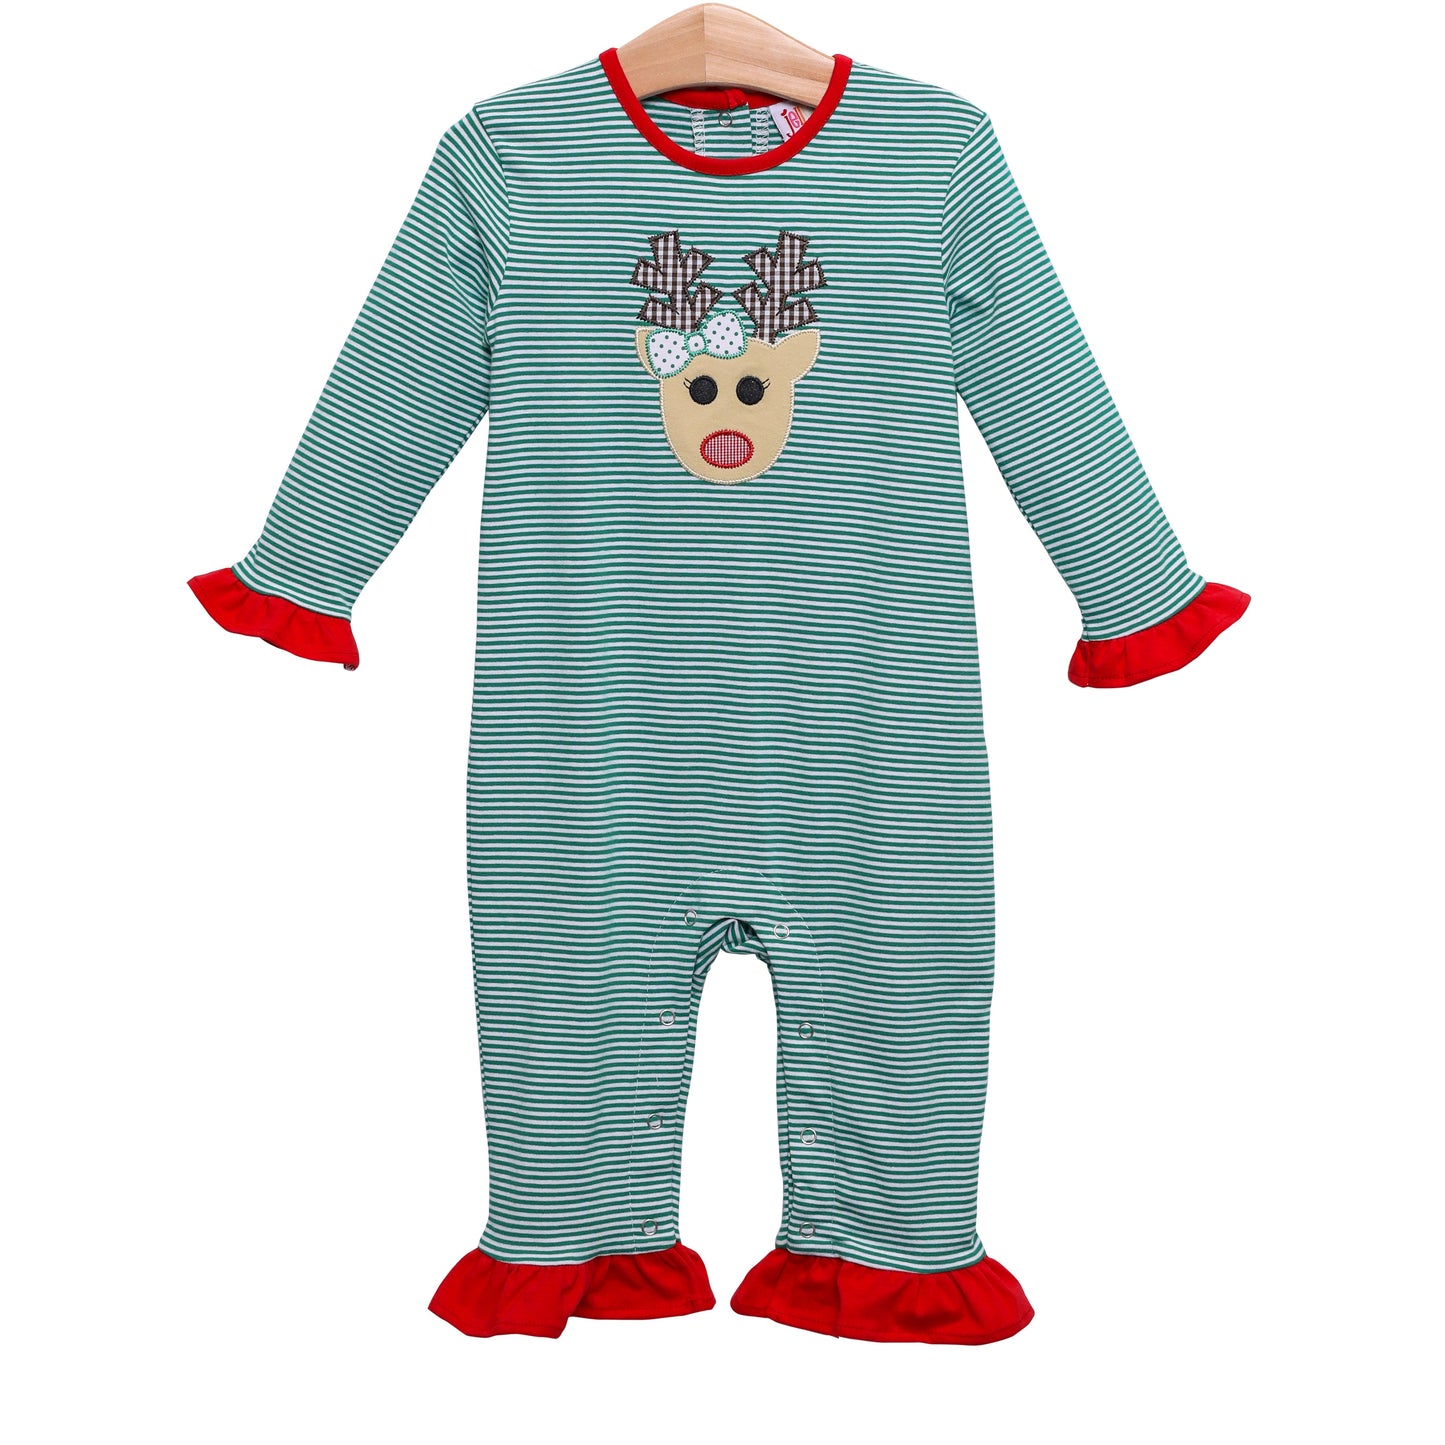 Reese Reindeer Ruffle Romper Jellybean by Smock Candy